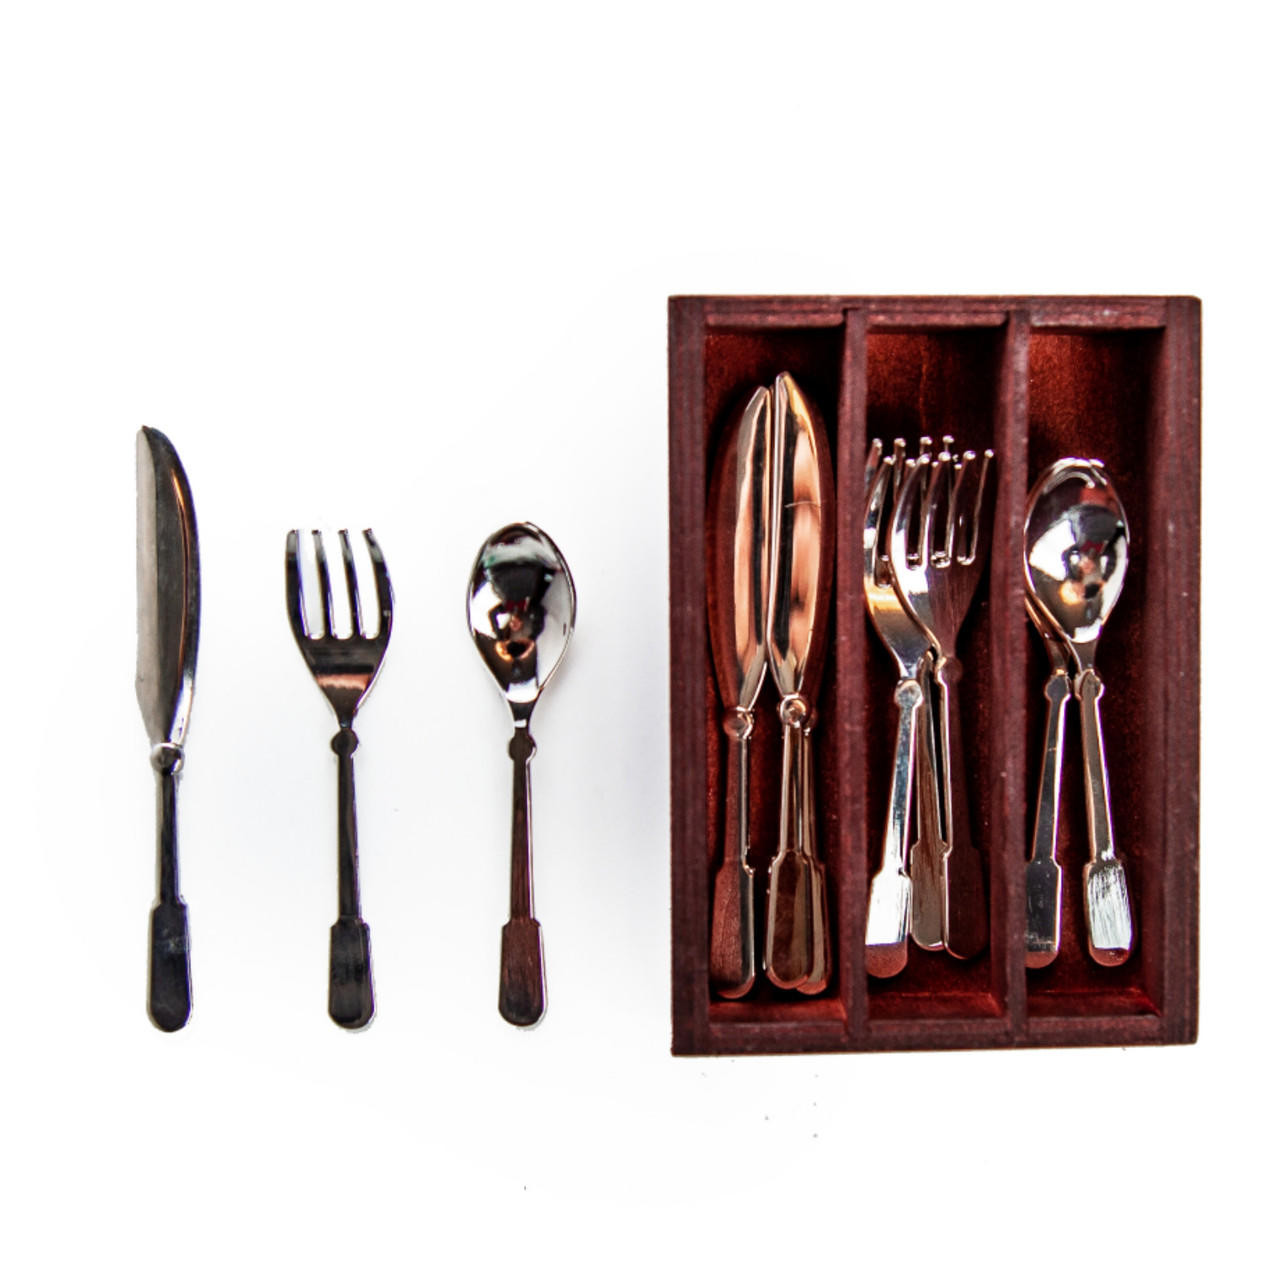 https://cdn11.bigcommerce.com/s-m5vcu70215/images/stencil/1280x1280/products/154/2364/the-queens-treasures-13-piece-silverware-set-with-wooden-holder-accessories-for-18-inch-dolls__99633.1692299286.jpg?c=1